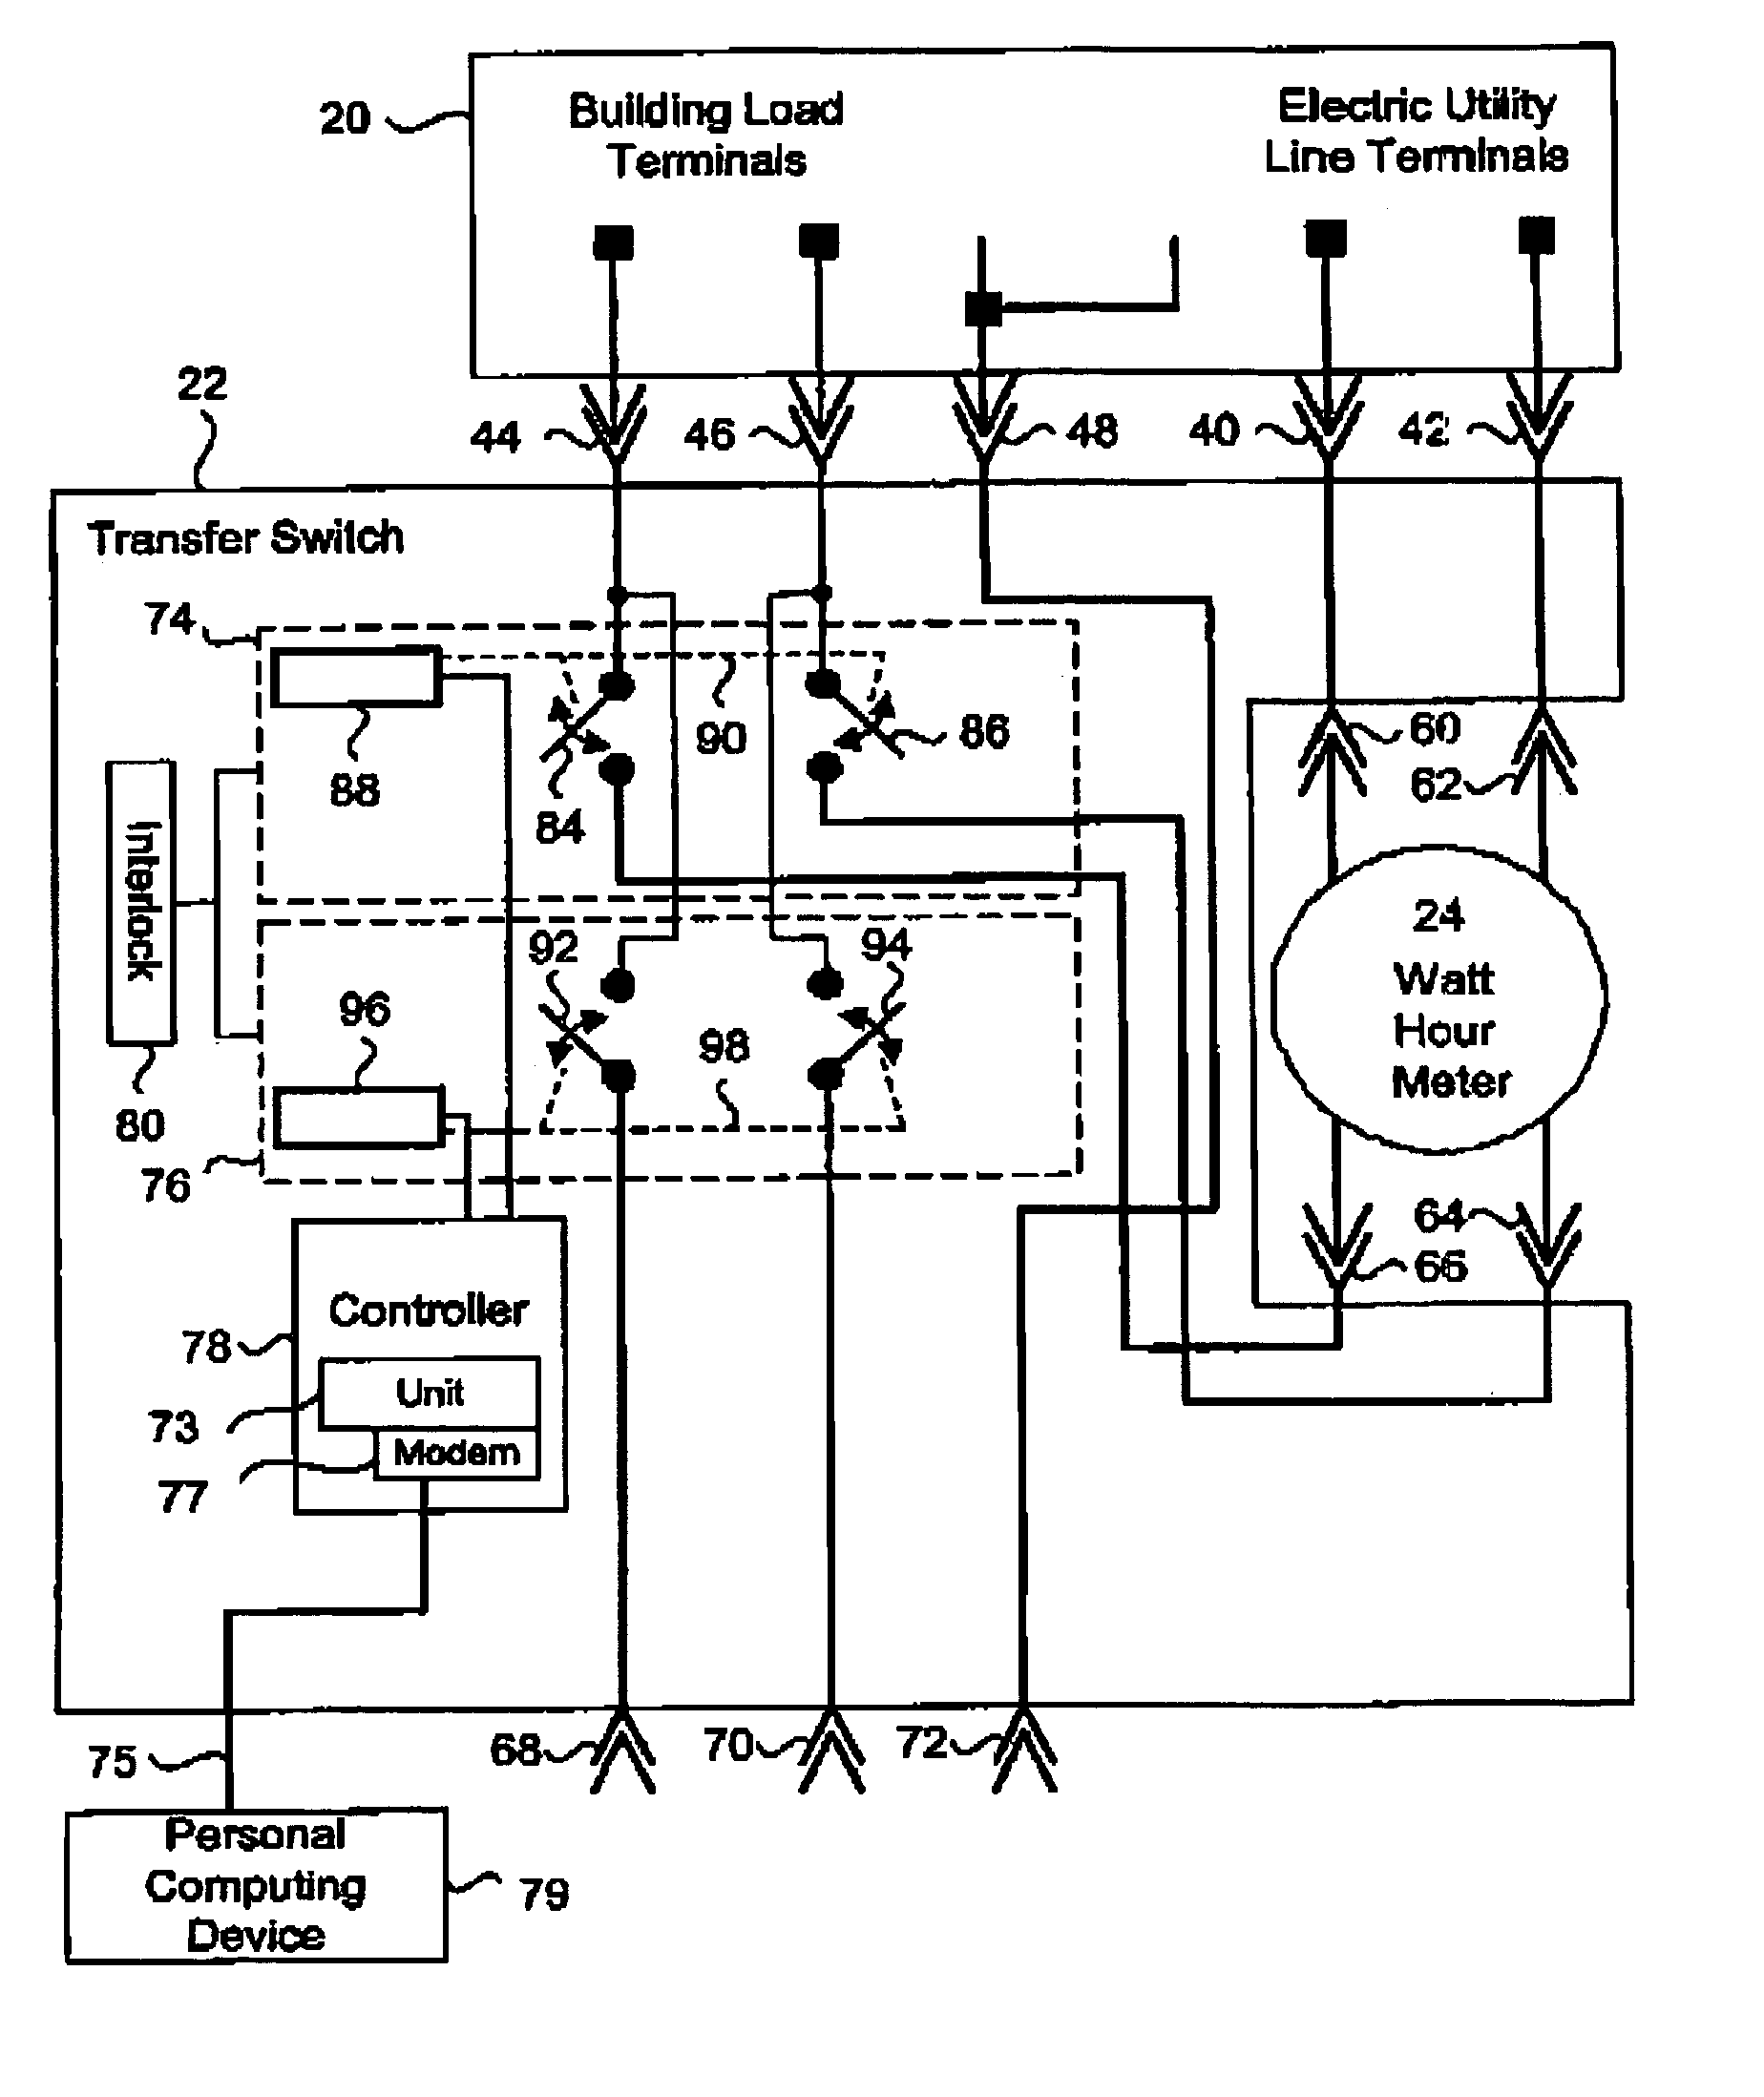 Power transfer switch assembly